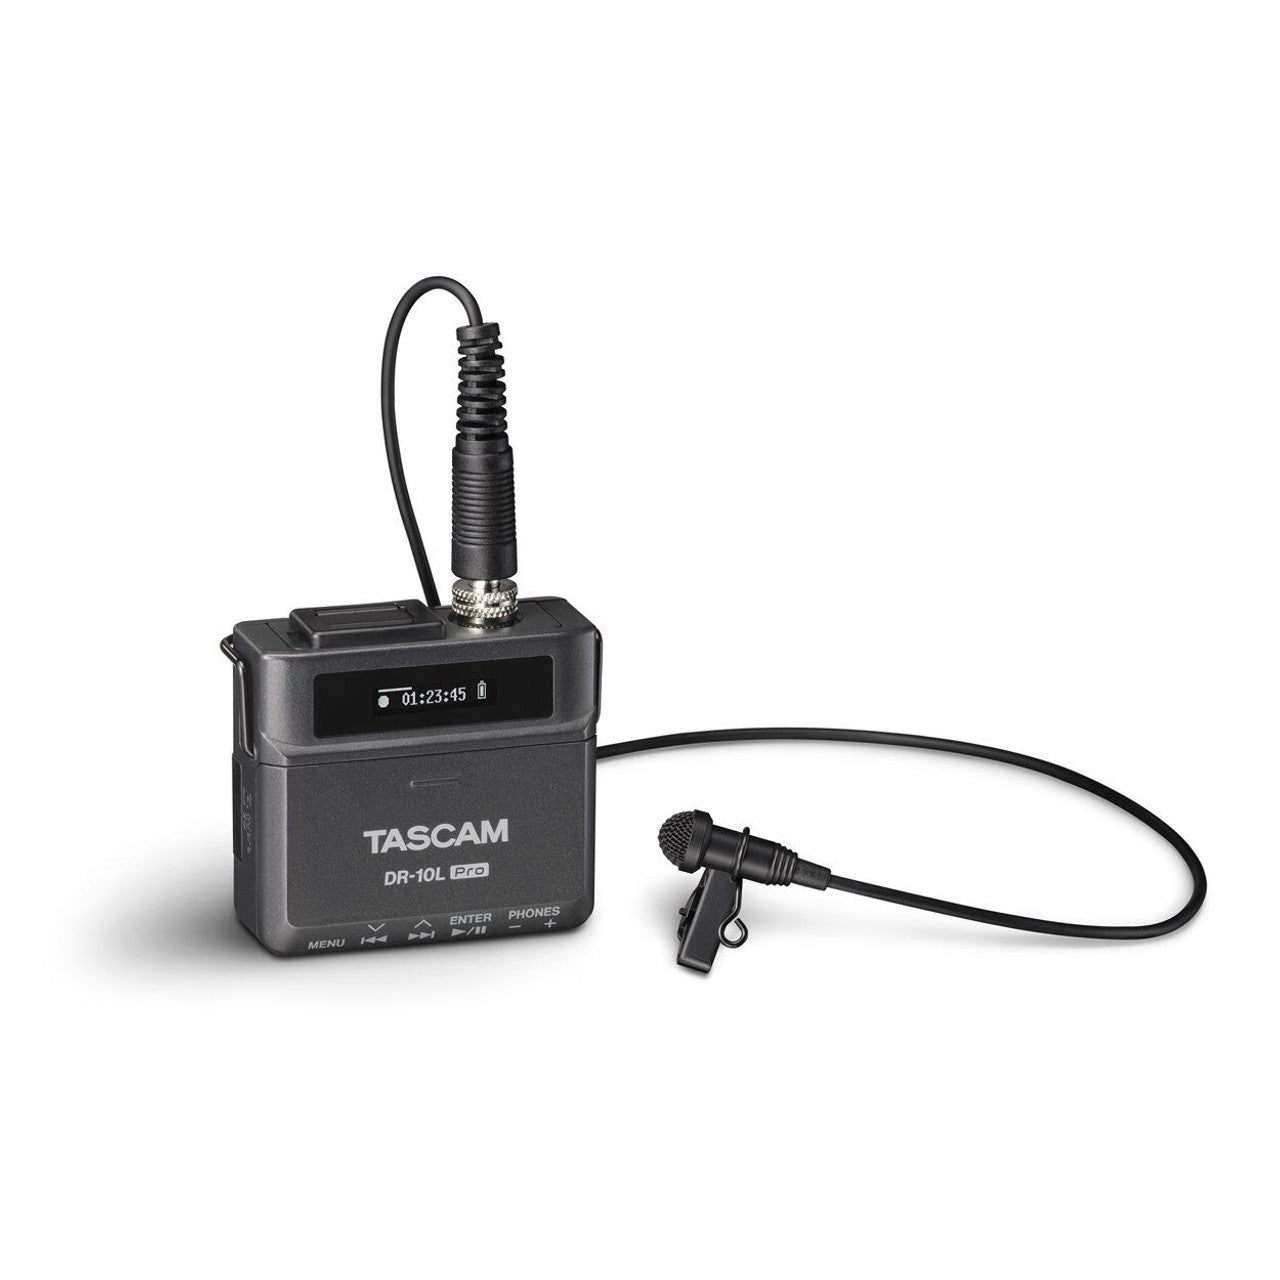 Product Image of Tascam DR-10L Digital Audio Recorder with Lavalier Microphone - Black